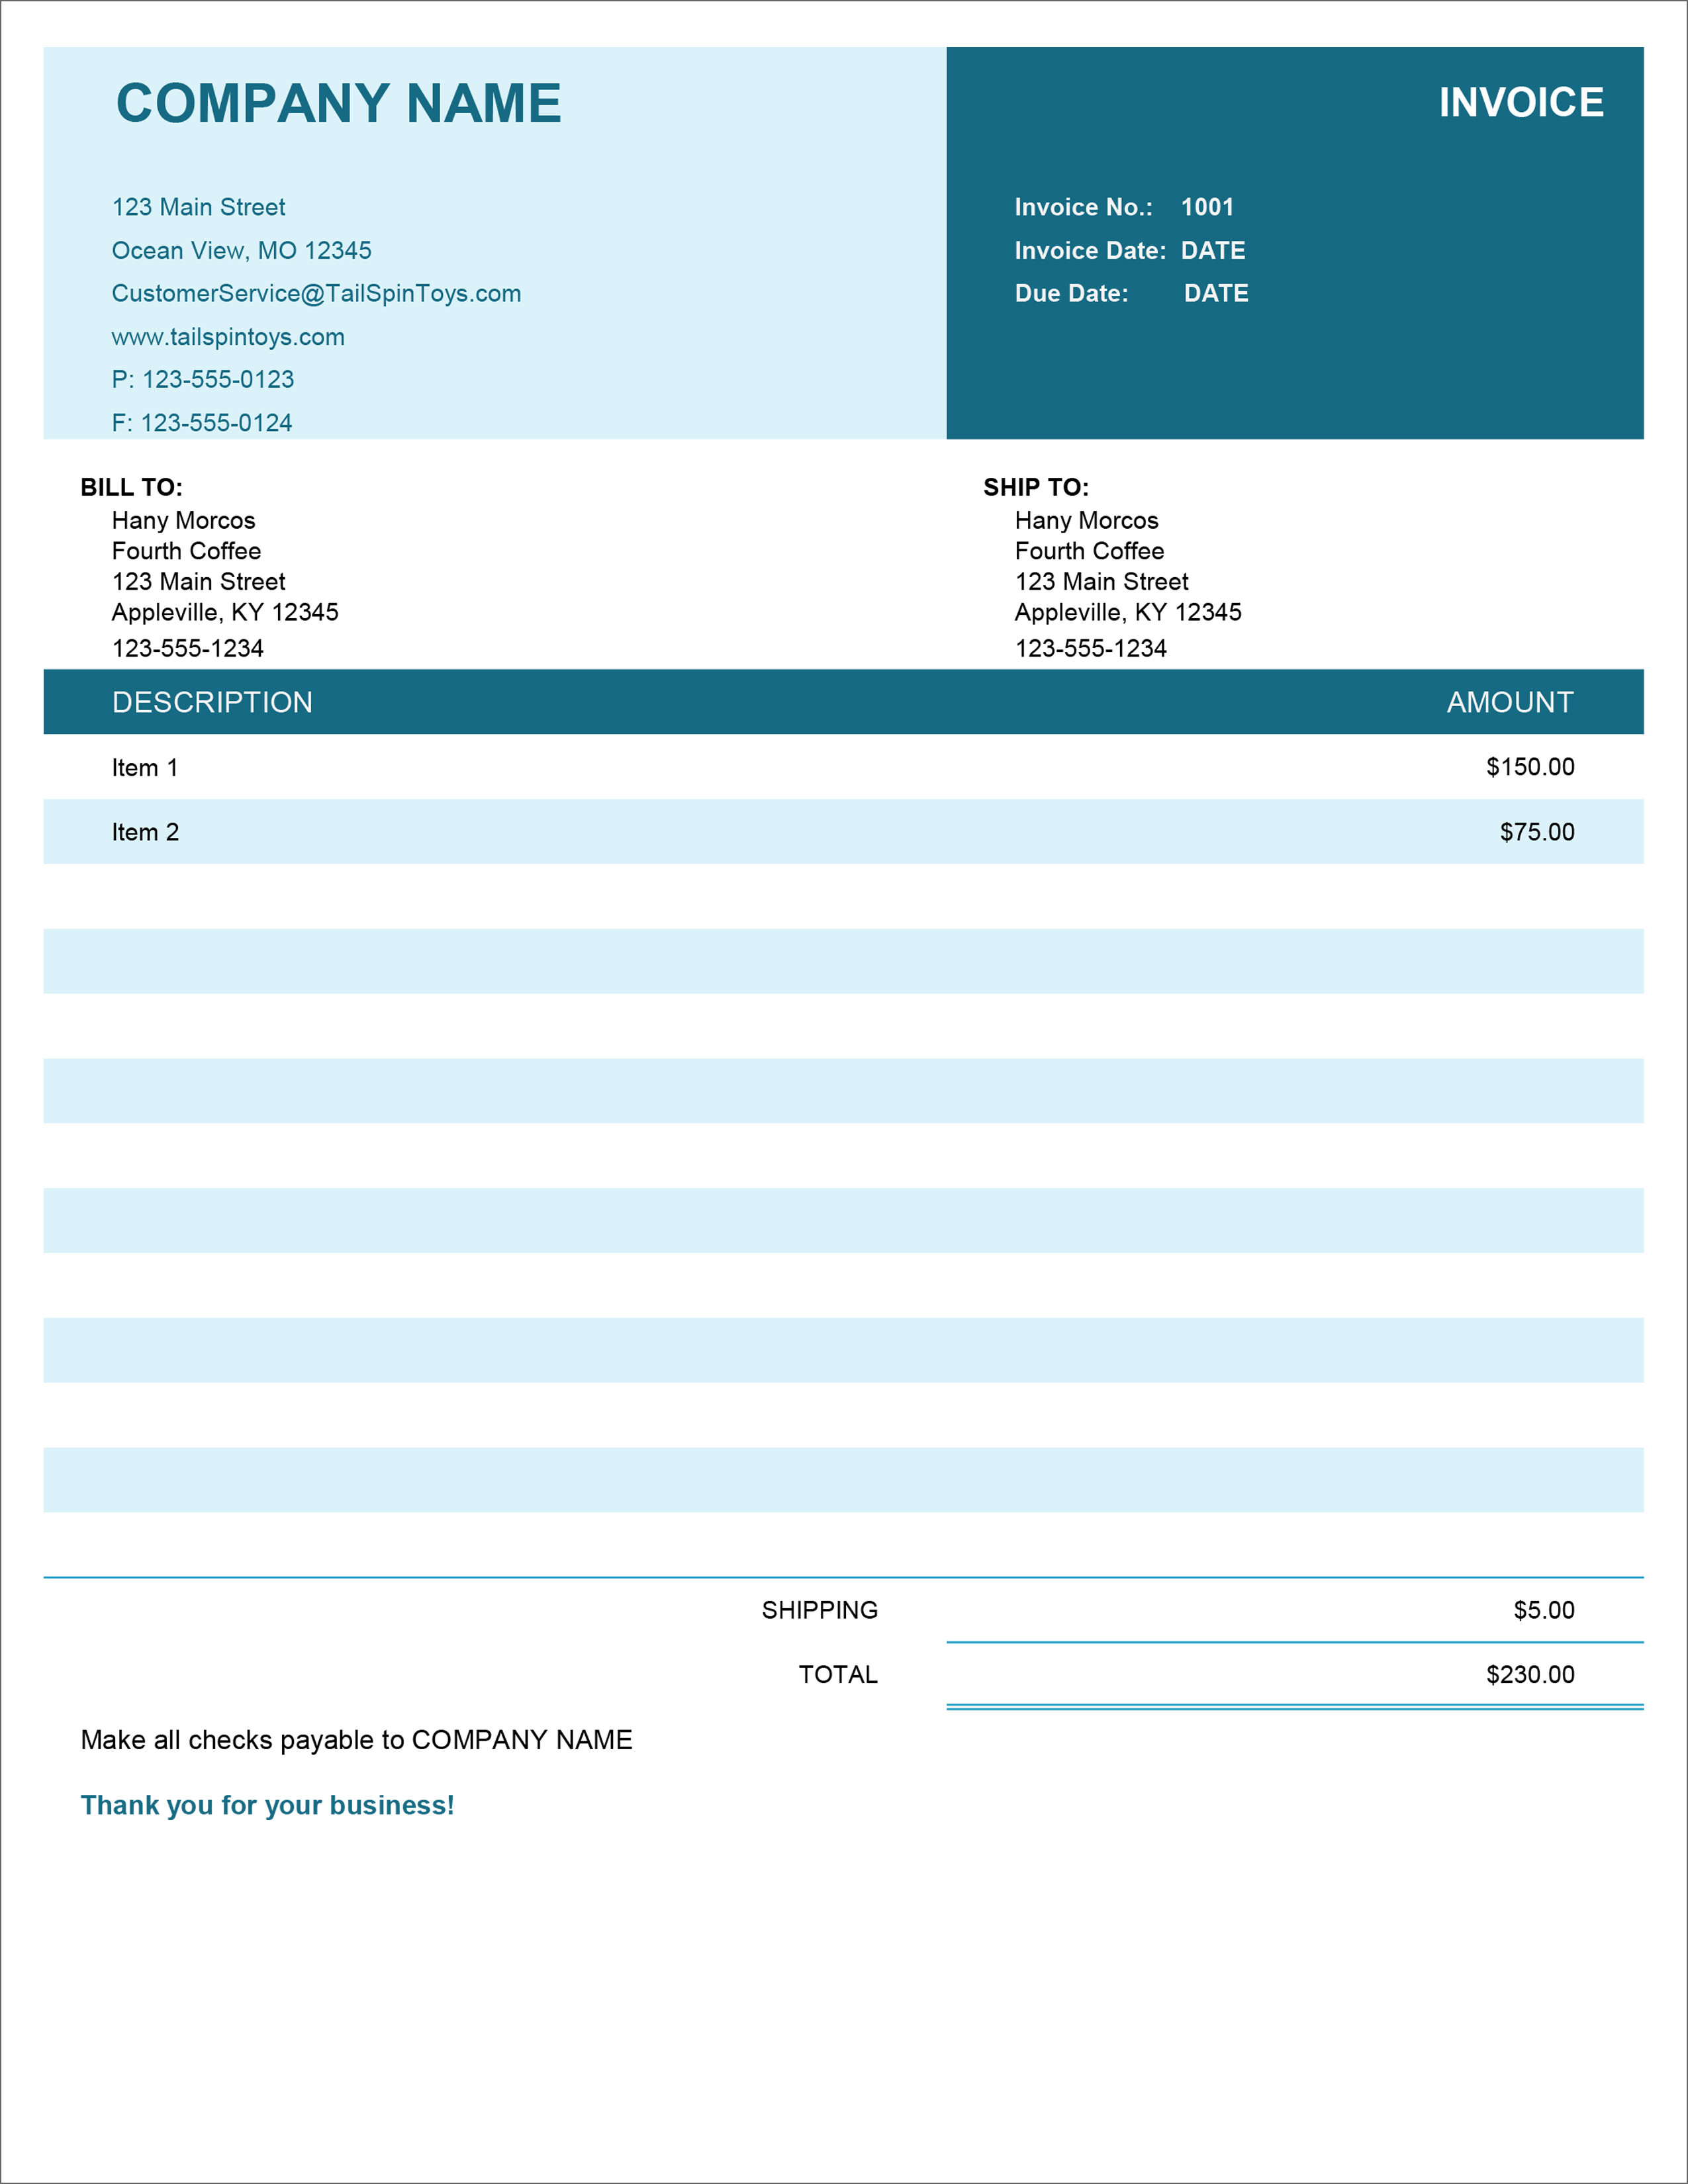 Legal Services Invoice Template Excel from cdn2.geckoandfly.com